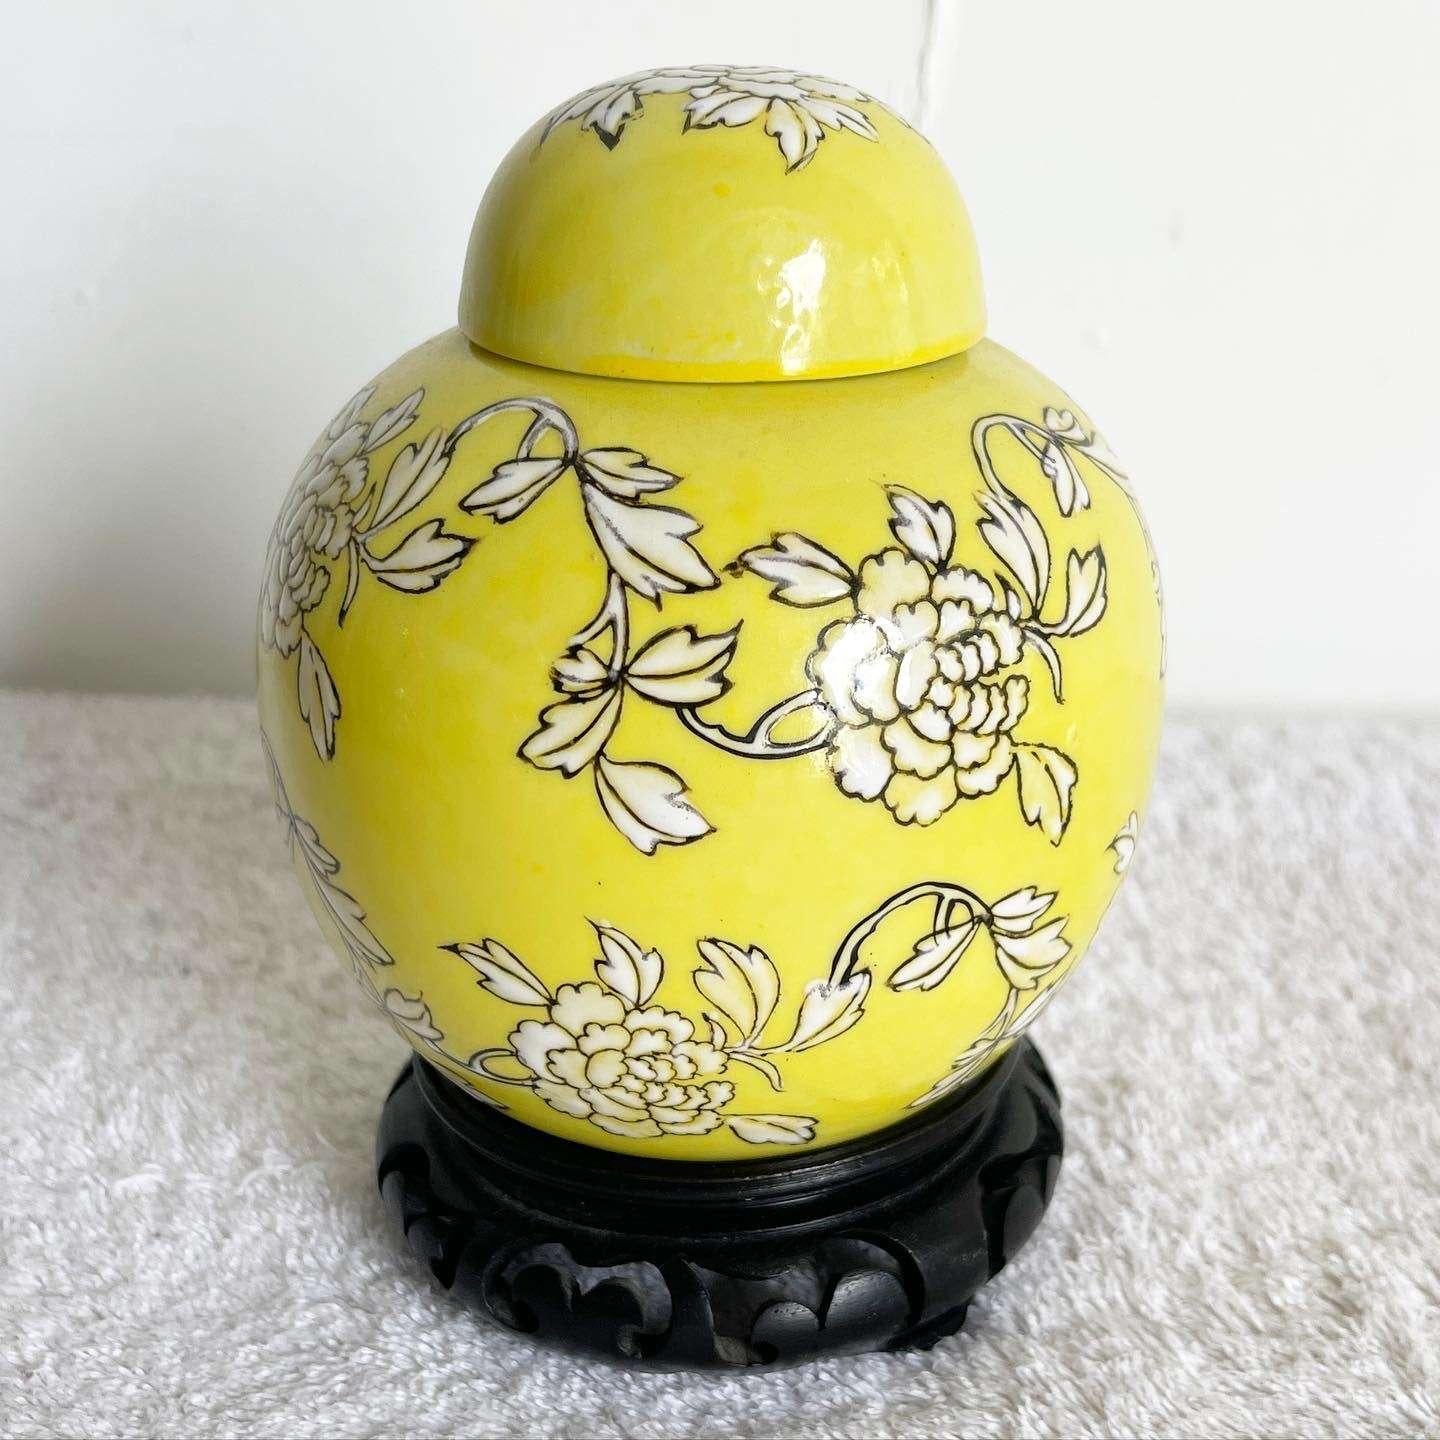 Immerse yourself in the timeless beauty of this exceptional vintage Chinese yellow floral ginger jar set. Crafted with care, the ceramic jar and accompanying metal and ceramic plate form an exquisite duo. Adorned with a captivating hand-painted